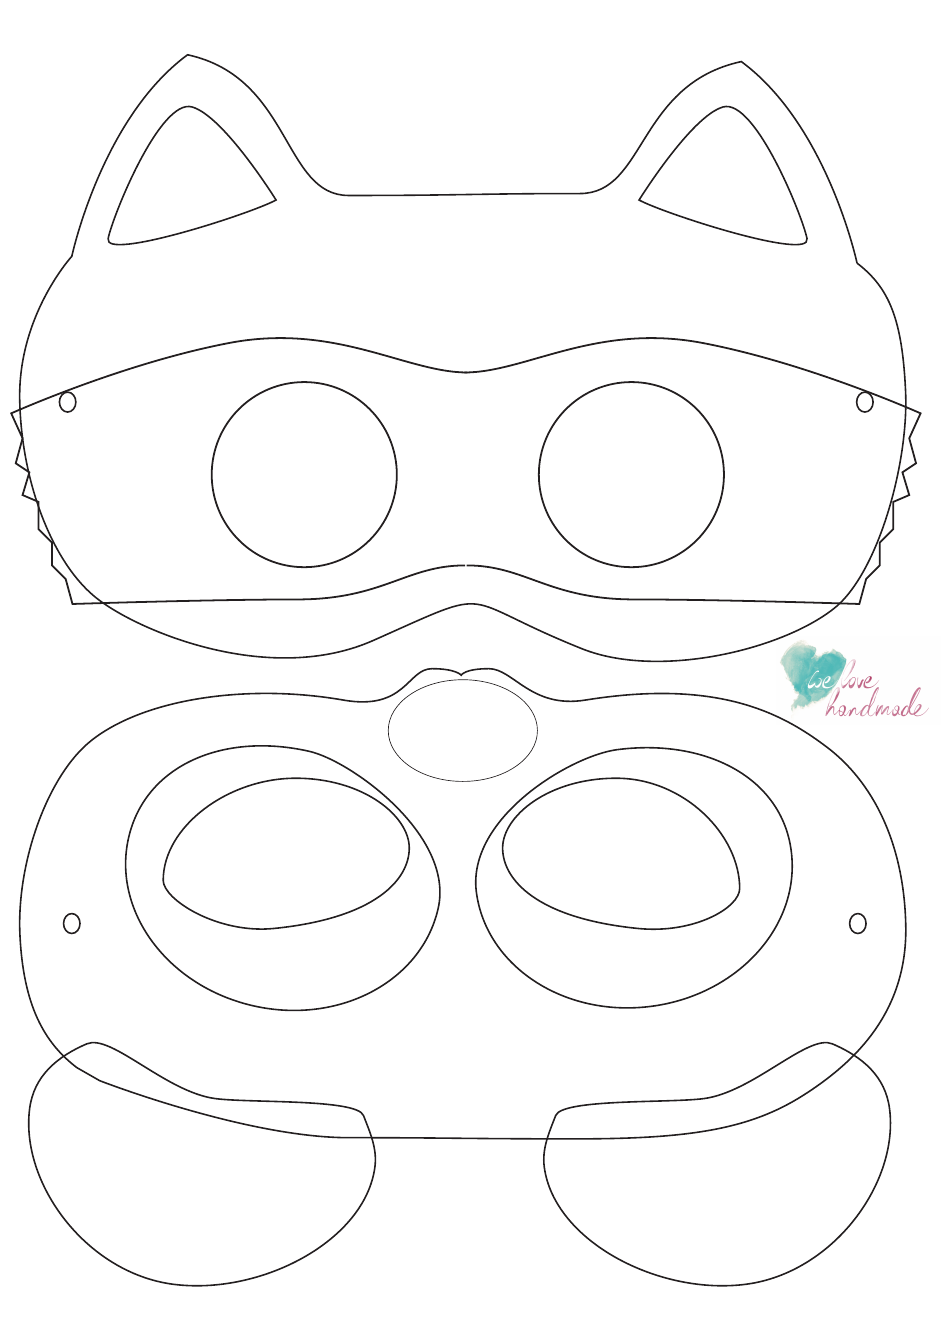 Raccoon Mask Coloring Template, Page 1